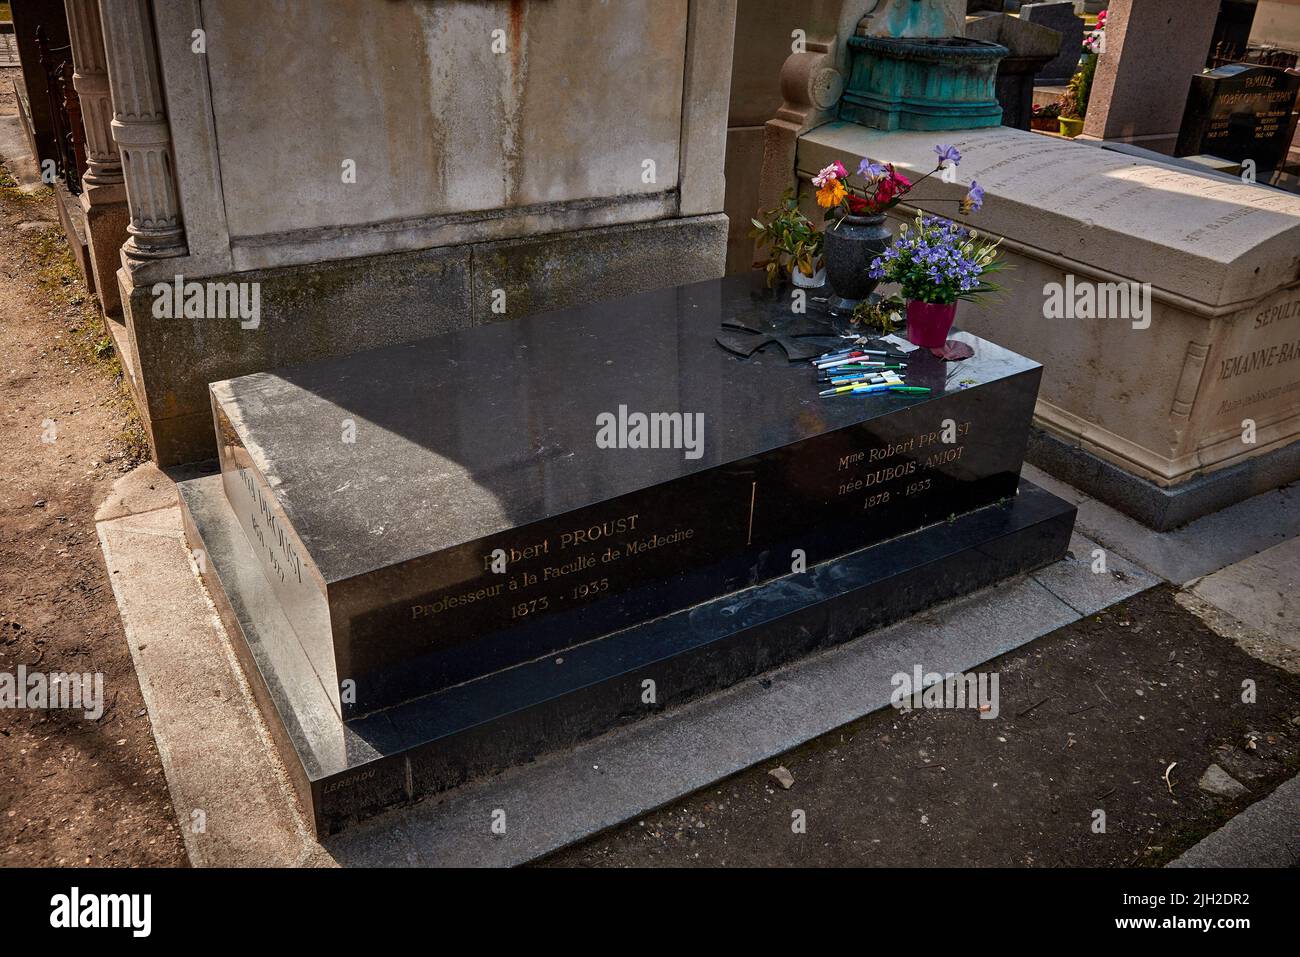 PARIS, FRANCE -APRIL 4, 2018: The tomb of Marcel Proust in Pere Lachaise Cemetery Stock Photo